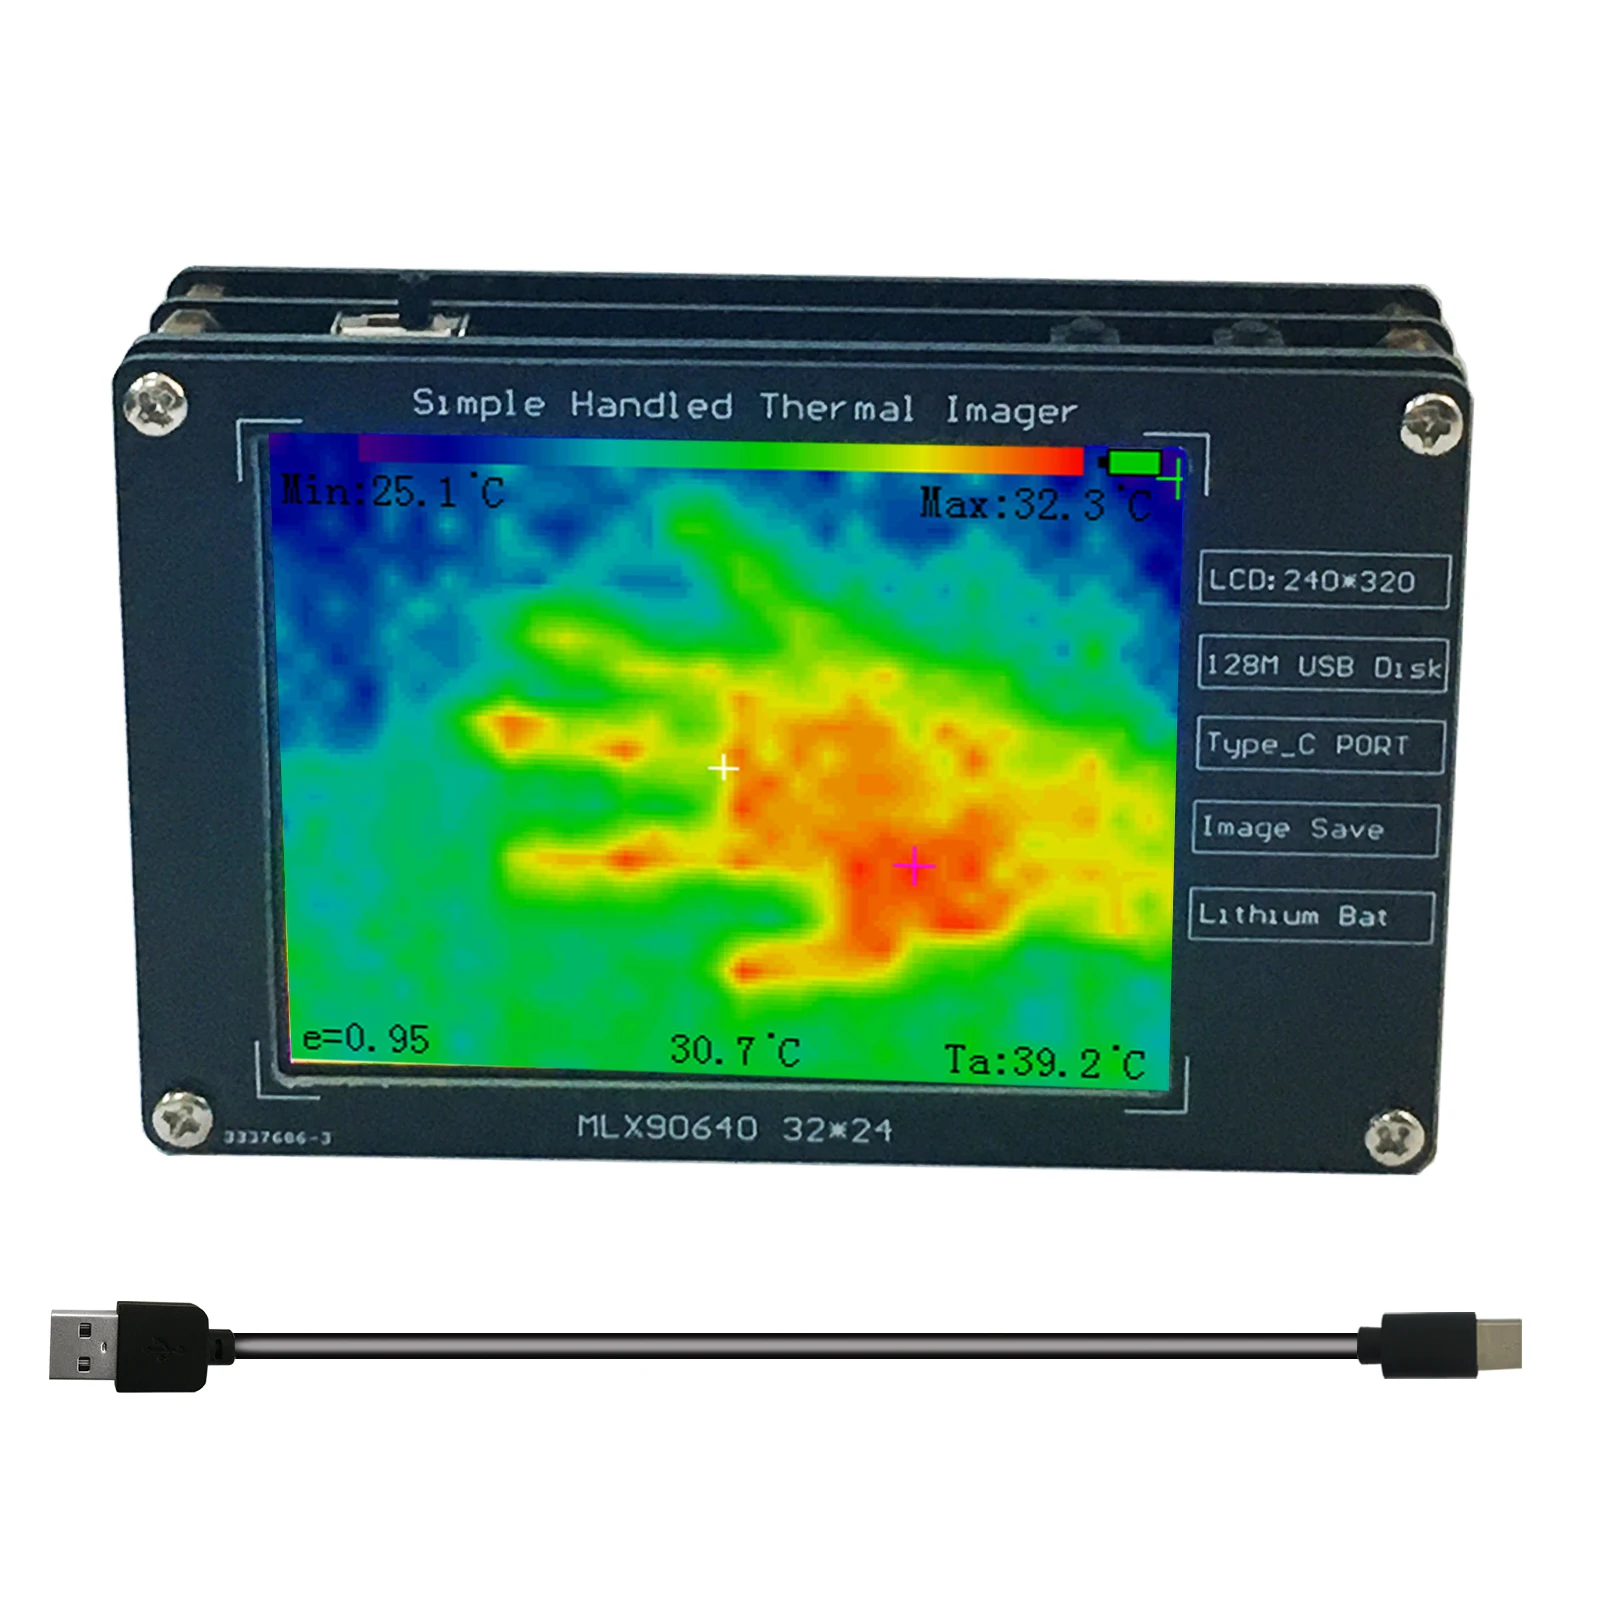 

MLX90640 2.8inch TFT Display Thermal Imager Infrared Sensor LCD 320*240 Resolution -40℃ to 300℃ Clear Definition Imaging Camera